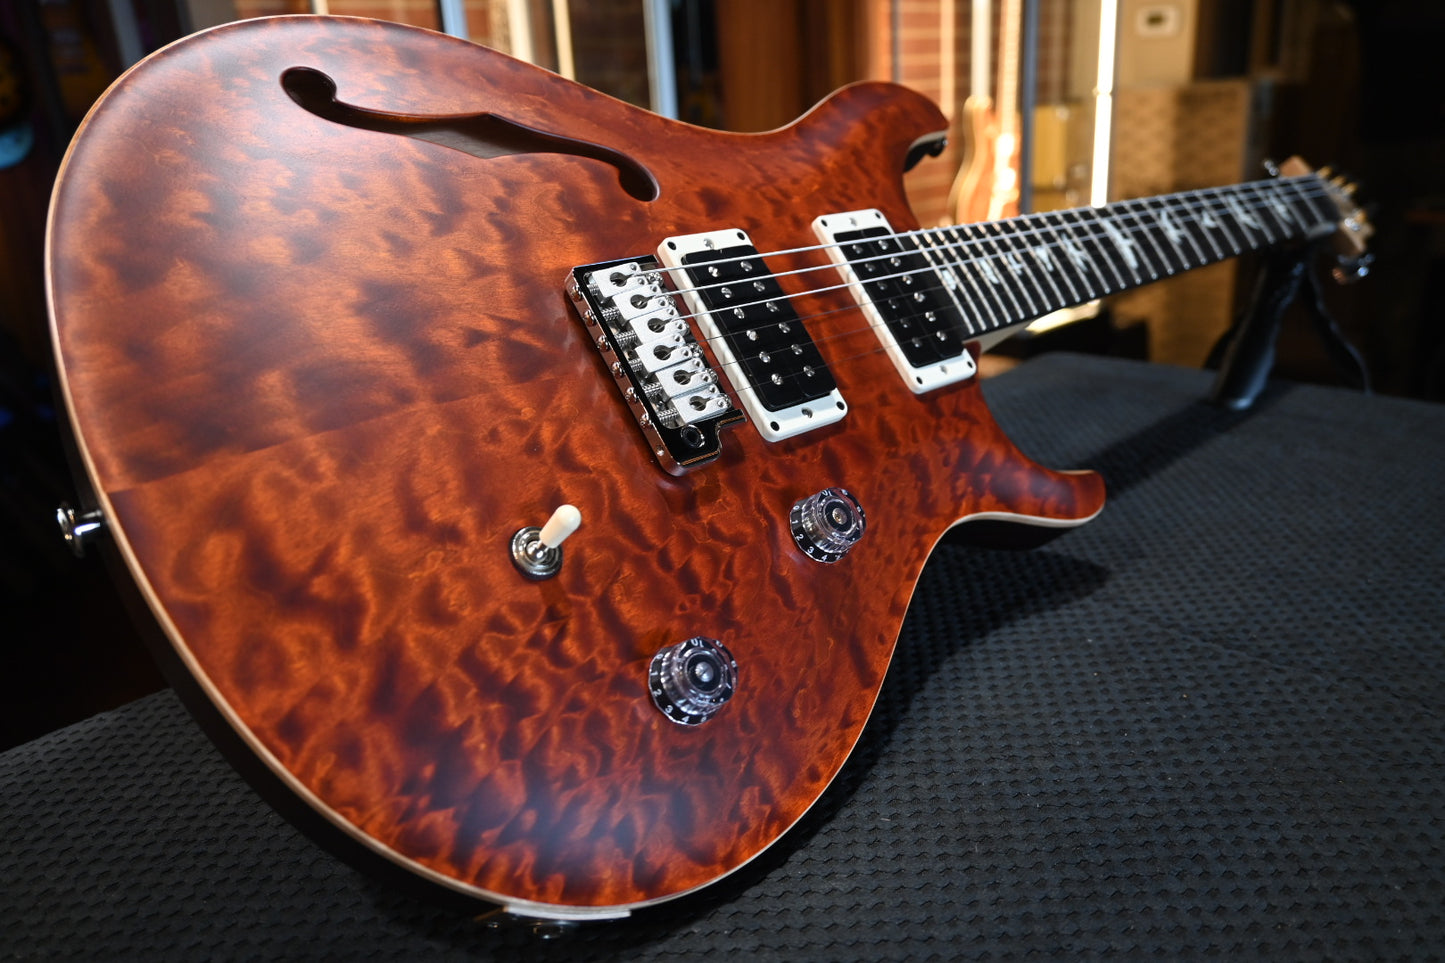 PRS Wood Library CE 24 Semi-Hollow Quilt - Tortoise Shell Satin Guitar #1334 - Danville Music